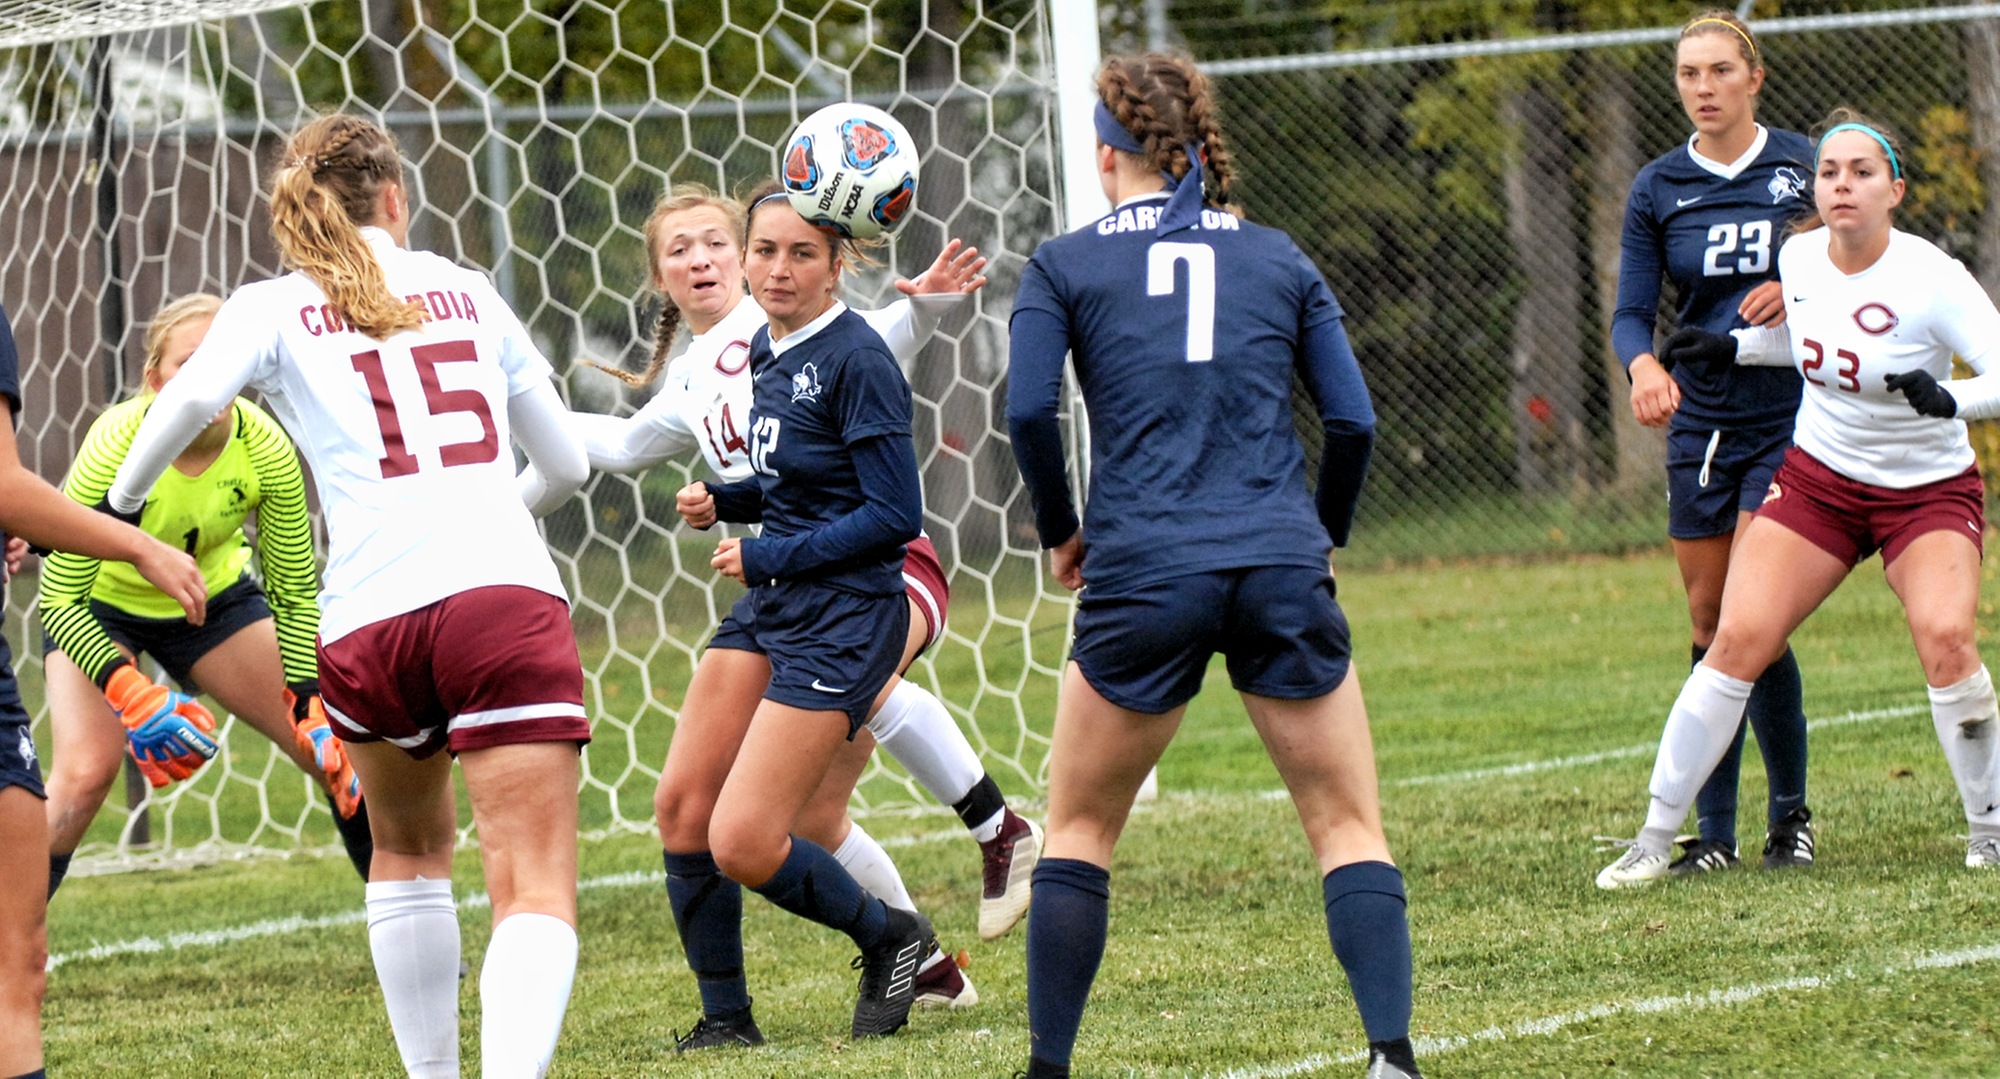 Players follow the ball  near the Carleton goal in the Cobbers' 1-1 2OT tie.